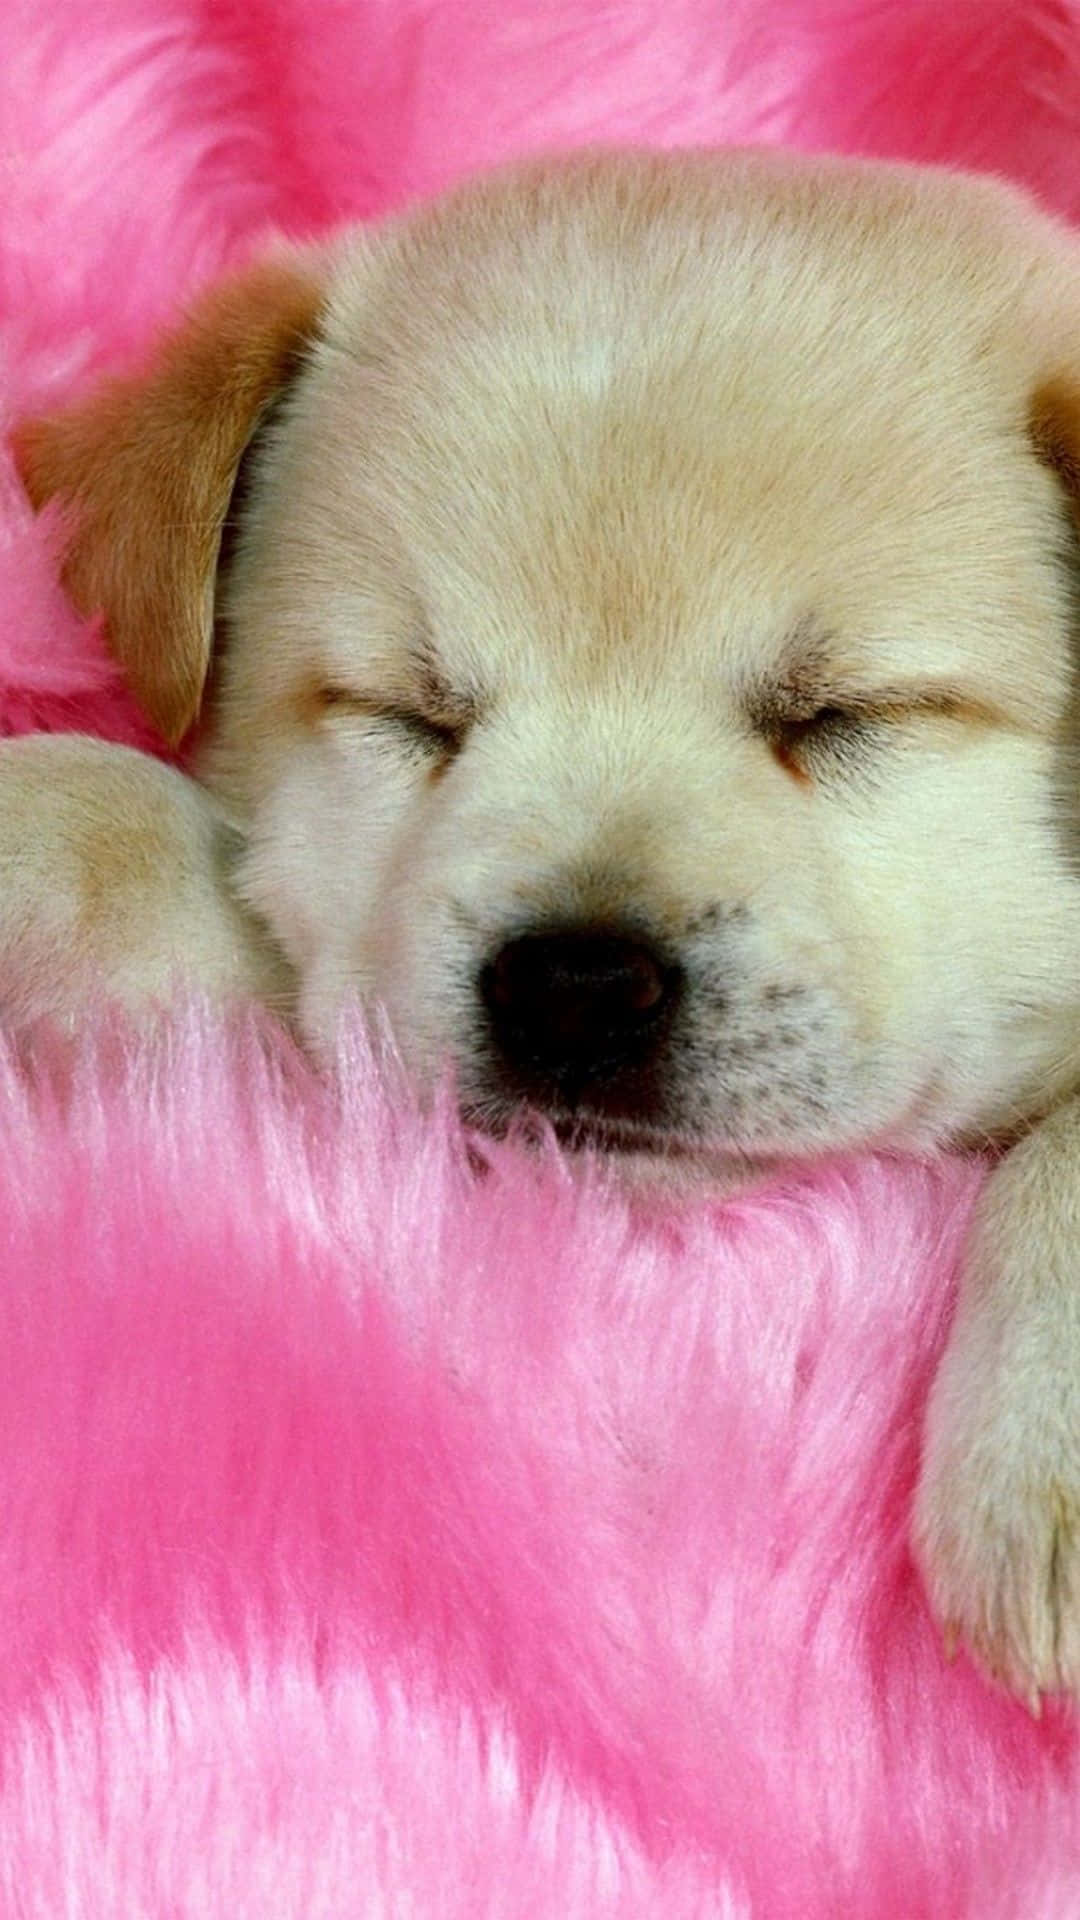 A Puppy Sleeping On A Pink Blanket Wallpaper